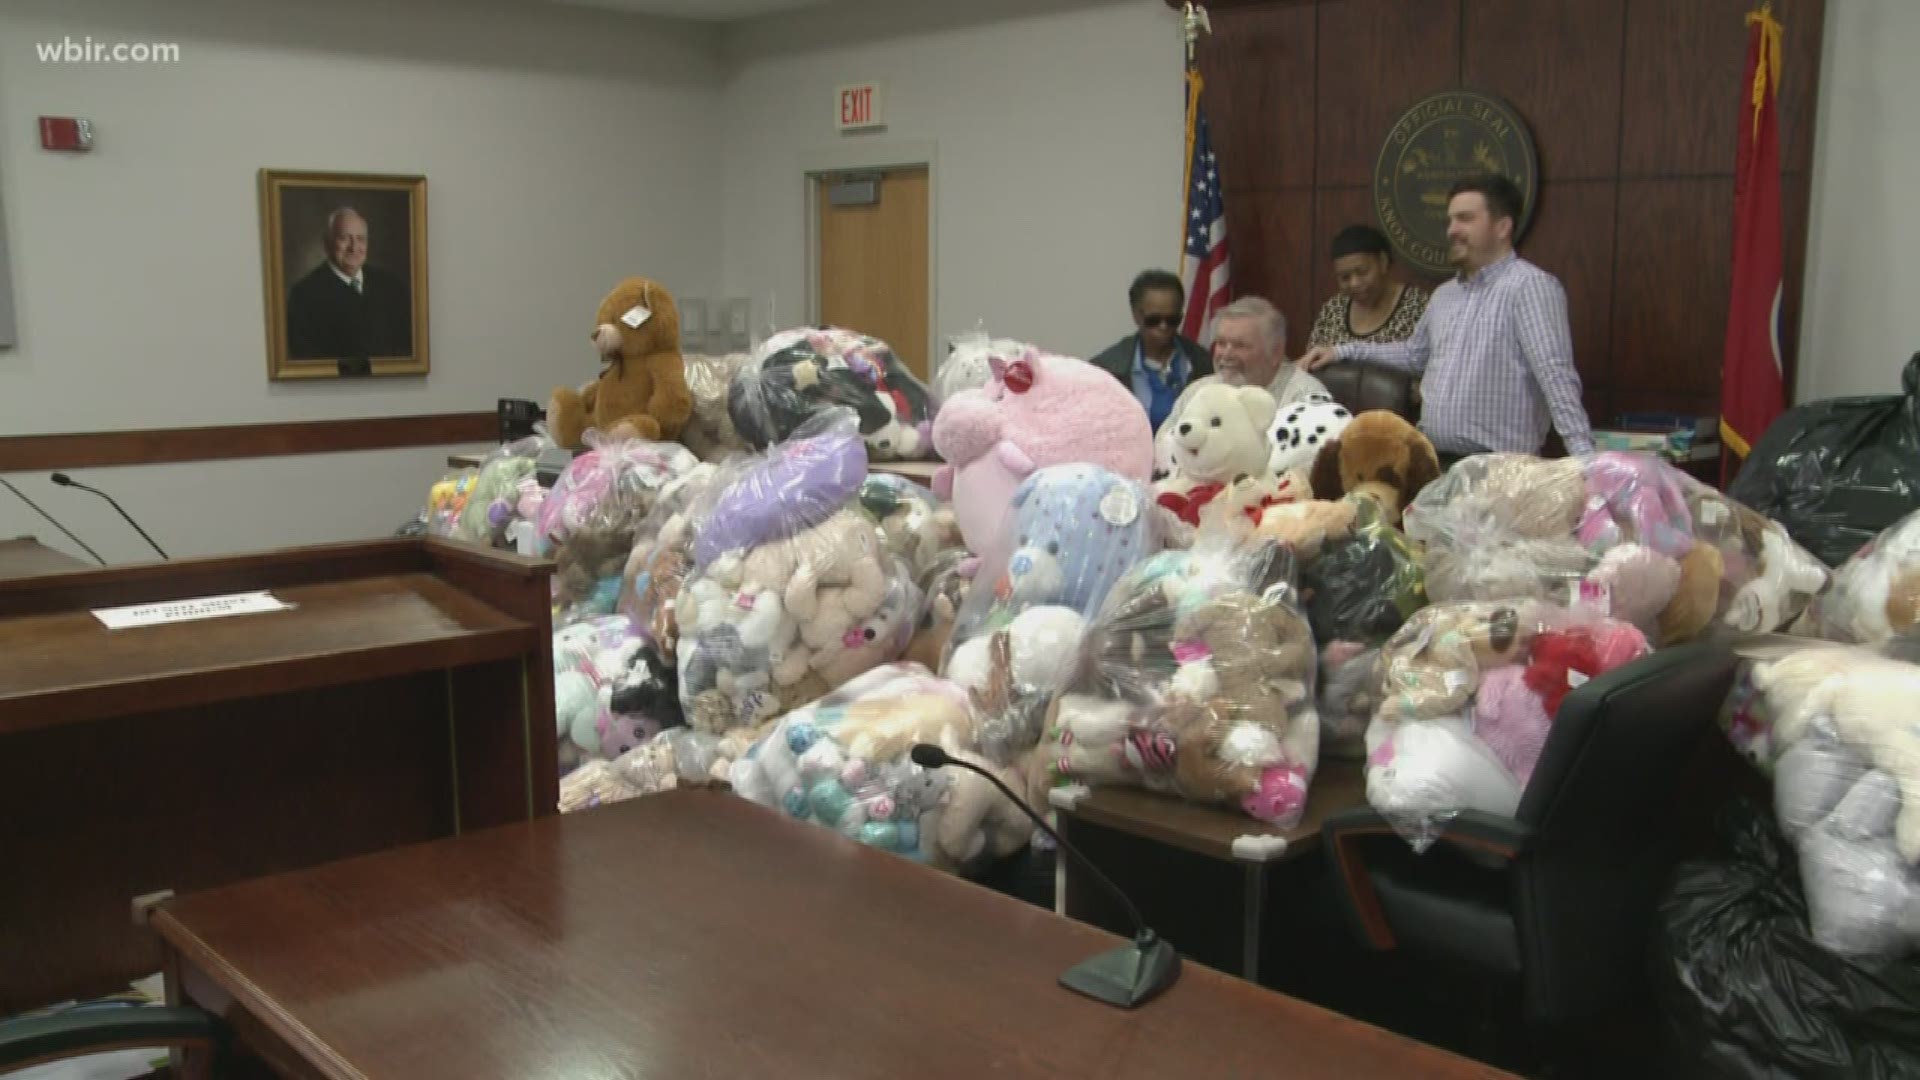 Teddy bear donation for kids at Knox County Juvenile Court wbir com